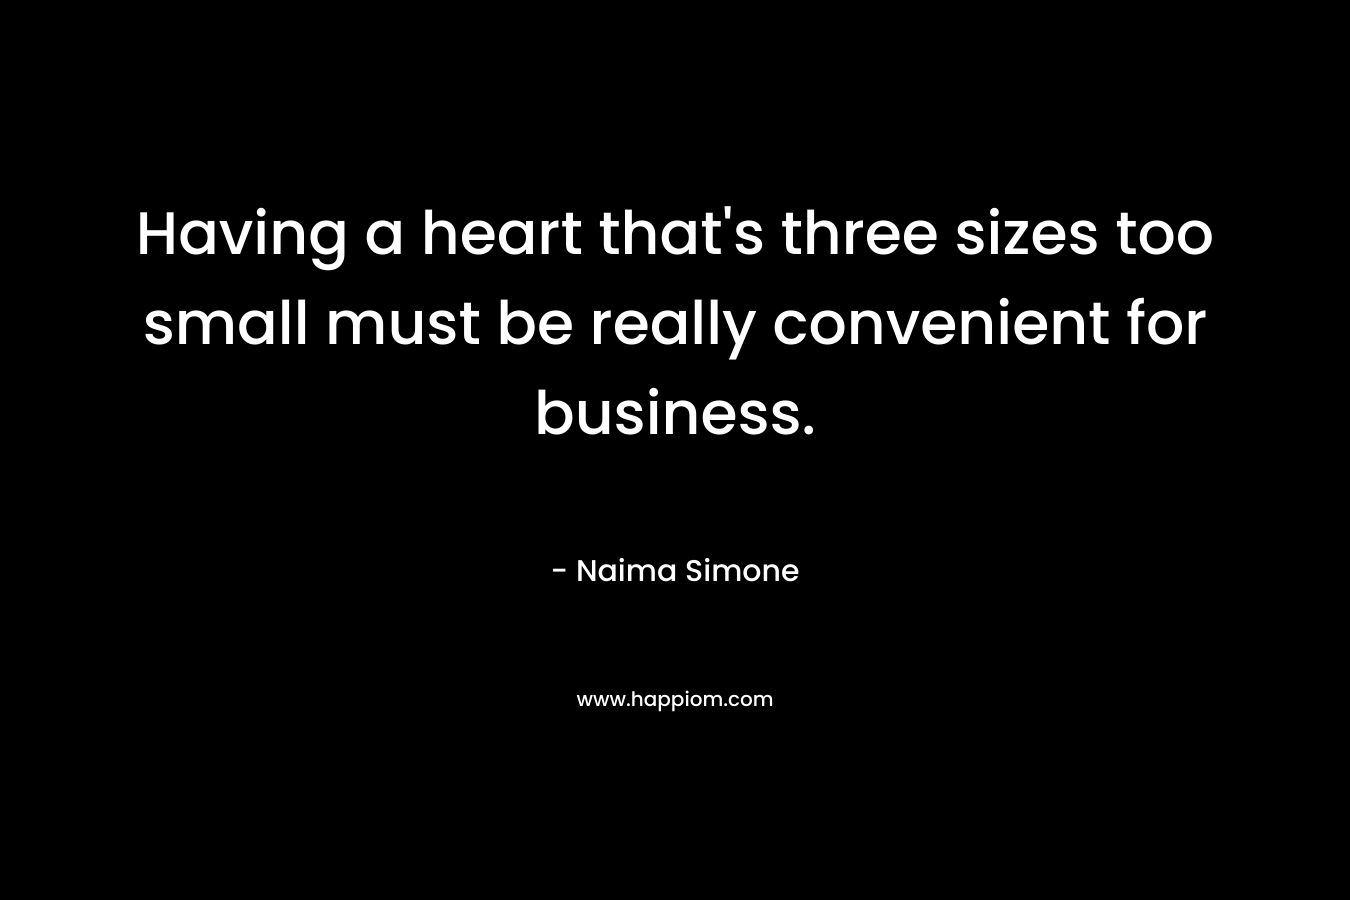 Having a heart that's three sizes too small must be really convenient for business.